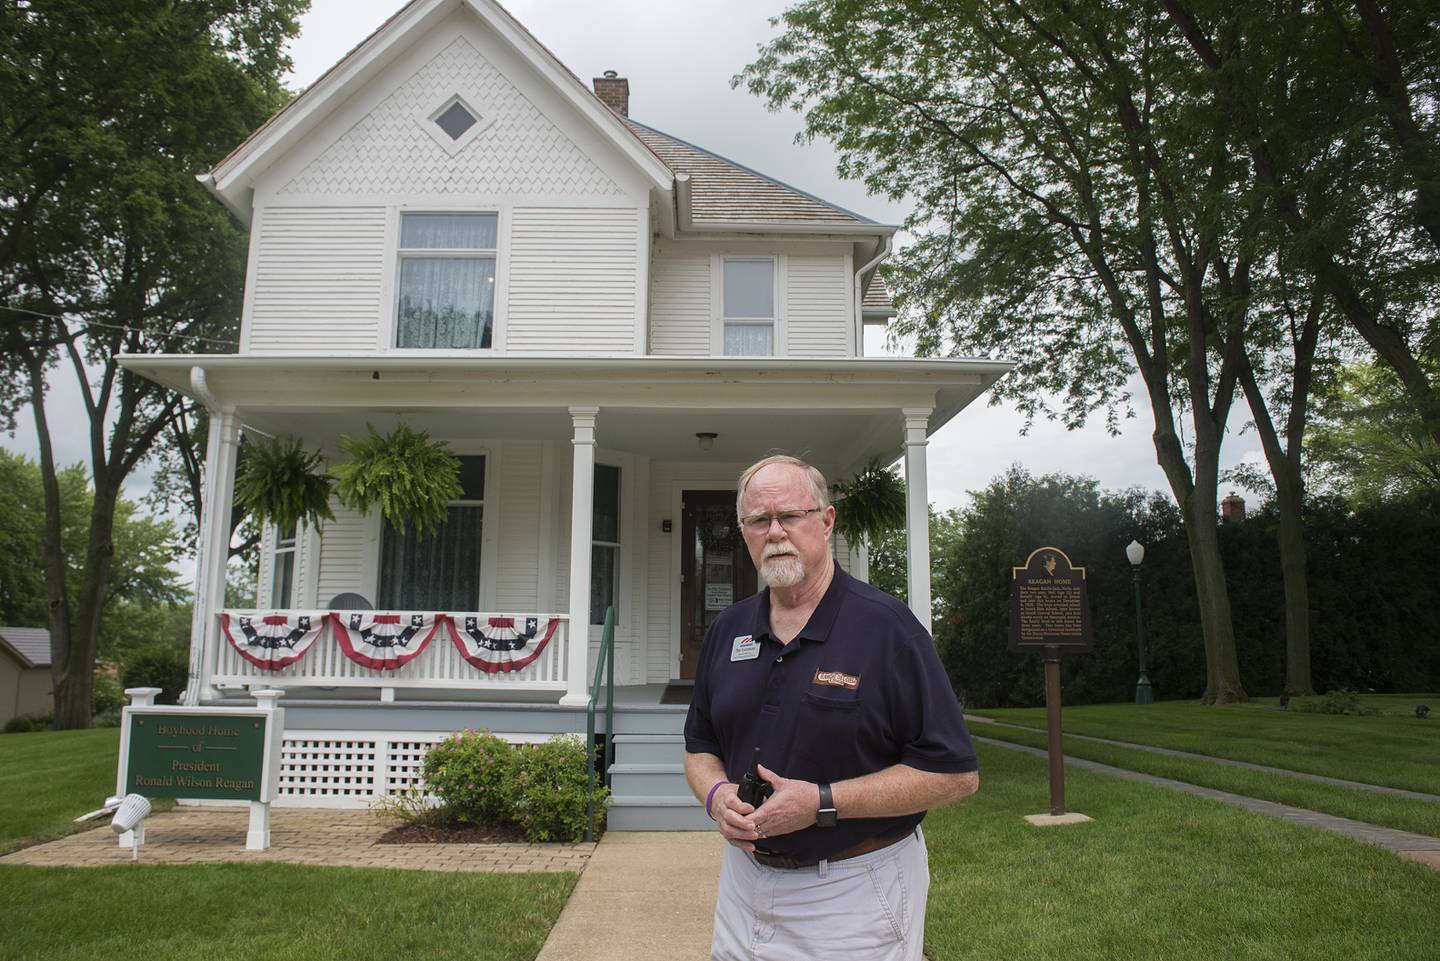 Boyhood home director Pat Gorman is excited the historic Dixon landmark has a dedicated owner with a knowledgeable staff to run the day to day.